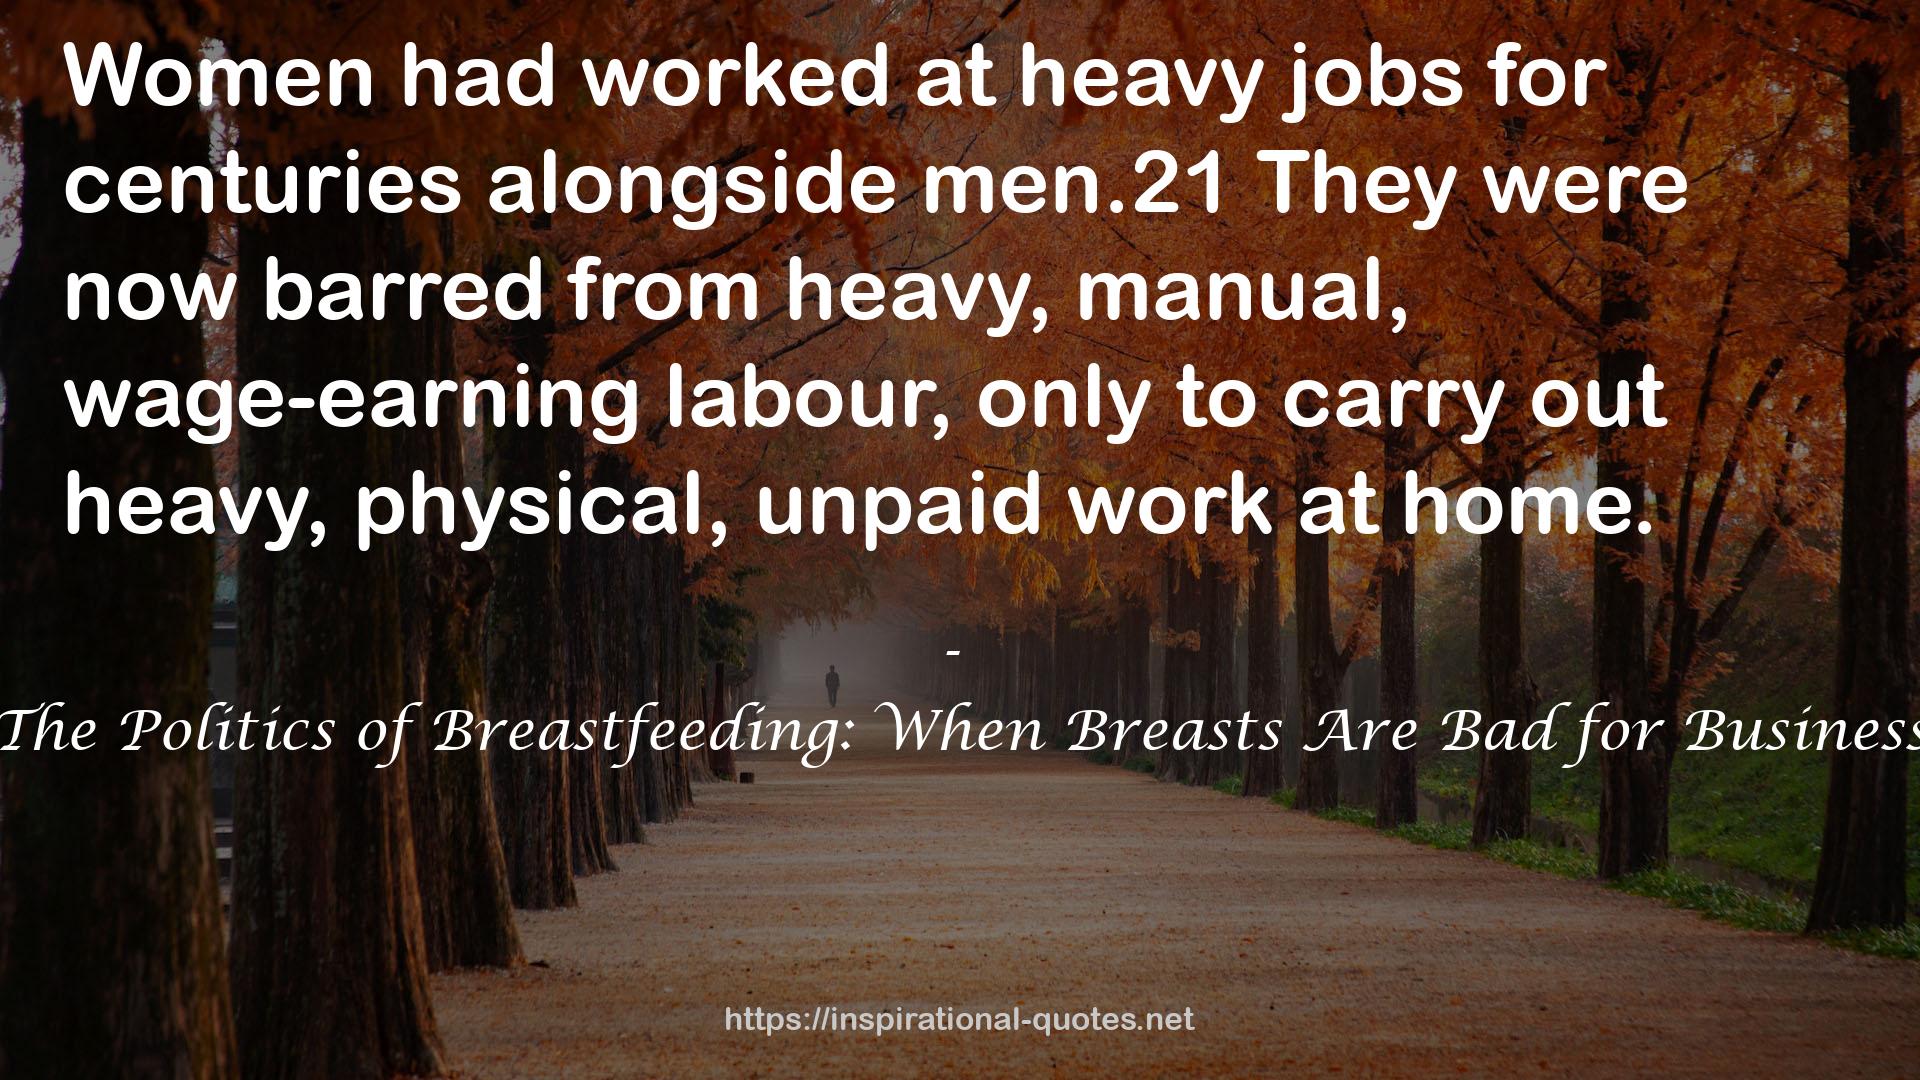 The Politics of Breastfeeding: When Breasts Are Bad for Business QUOTES